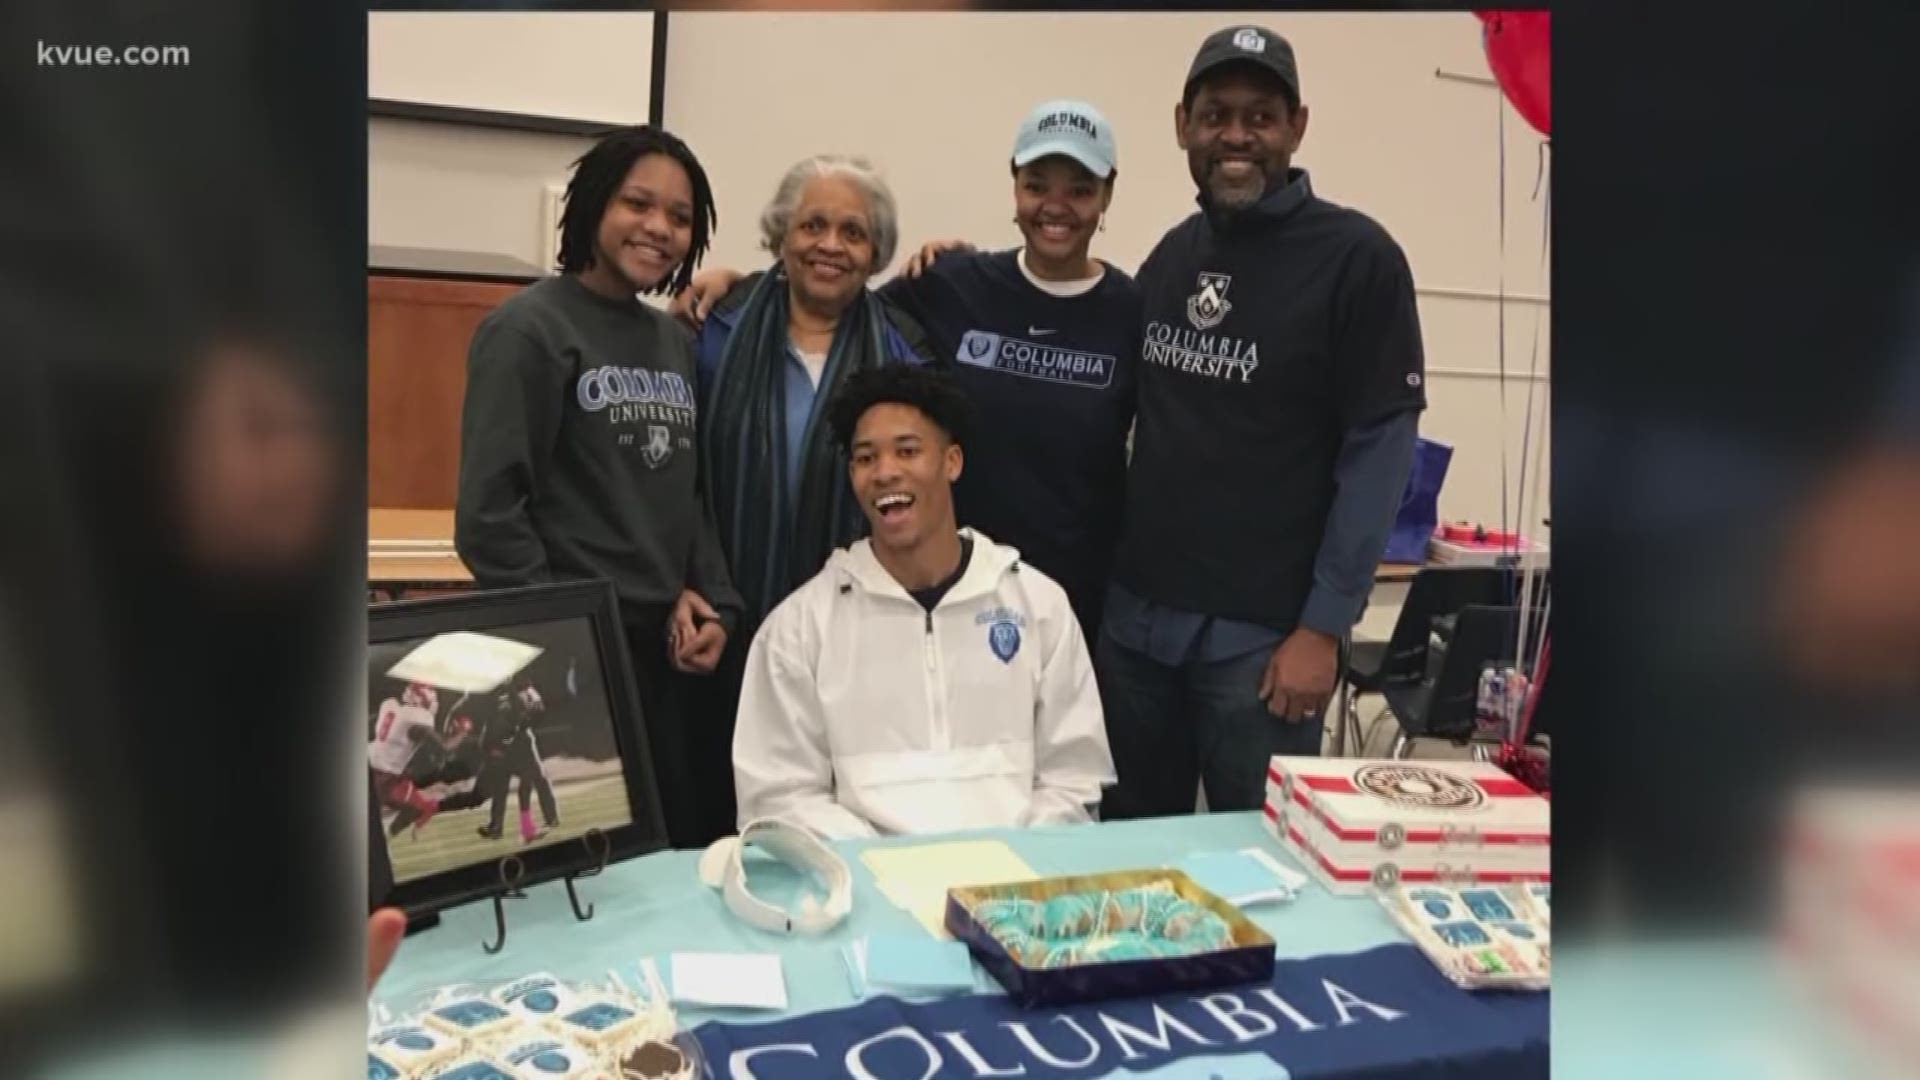 He runs track, plays basketball, and has a 3.9 GPA. And Wednesday, he signed to play football in college. He says a tragedy actually helped drive him, made him resilient and ultimately successful.